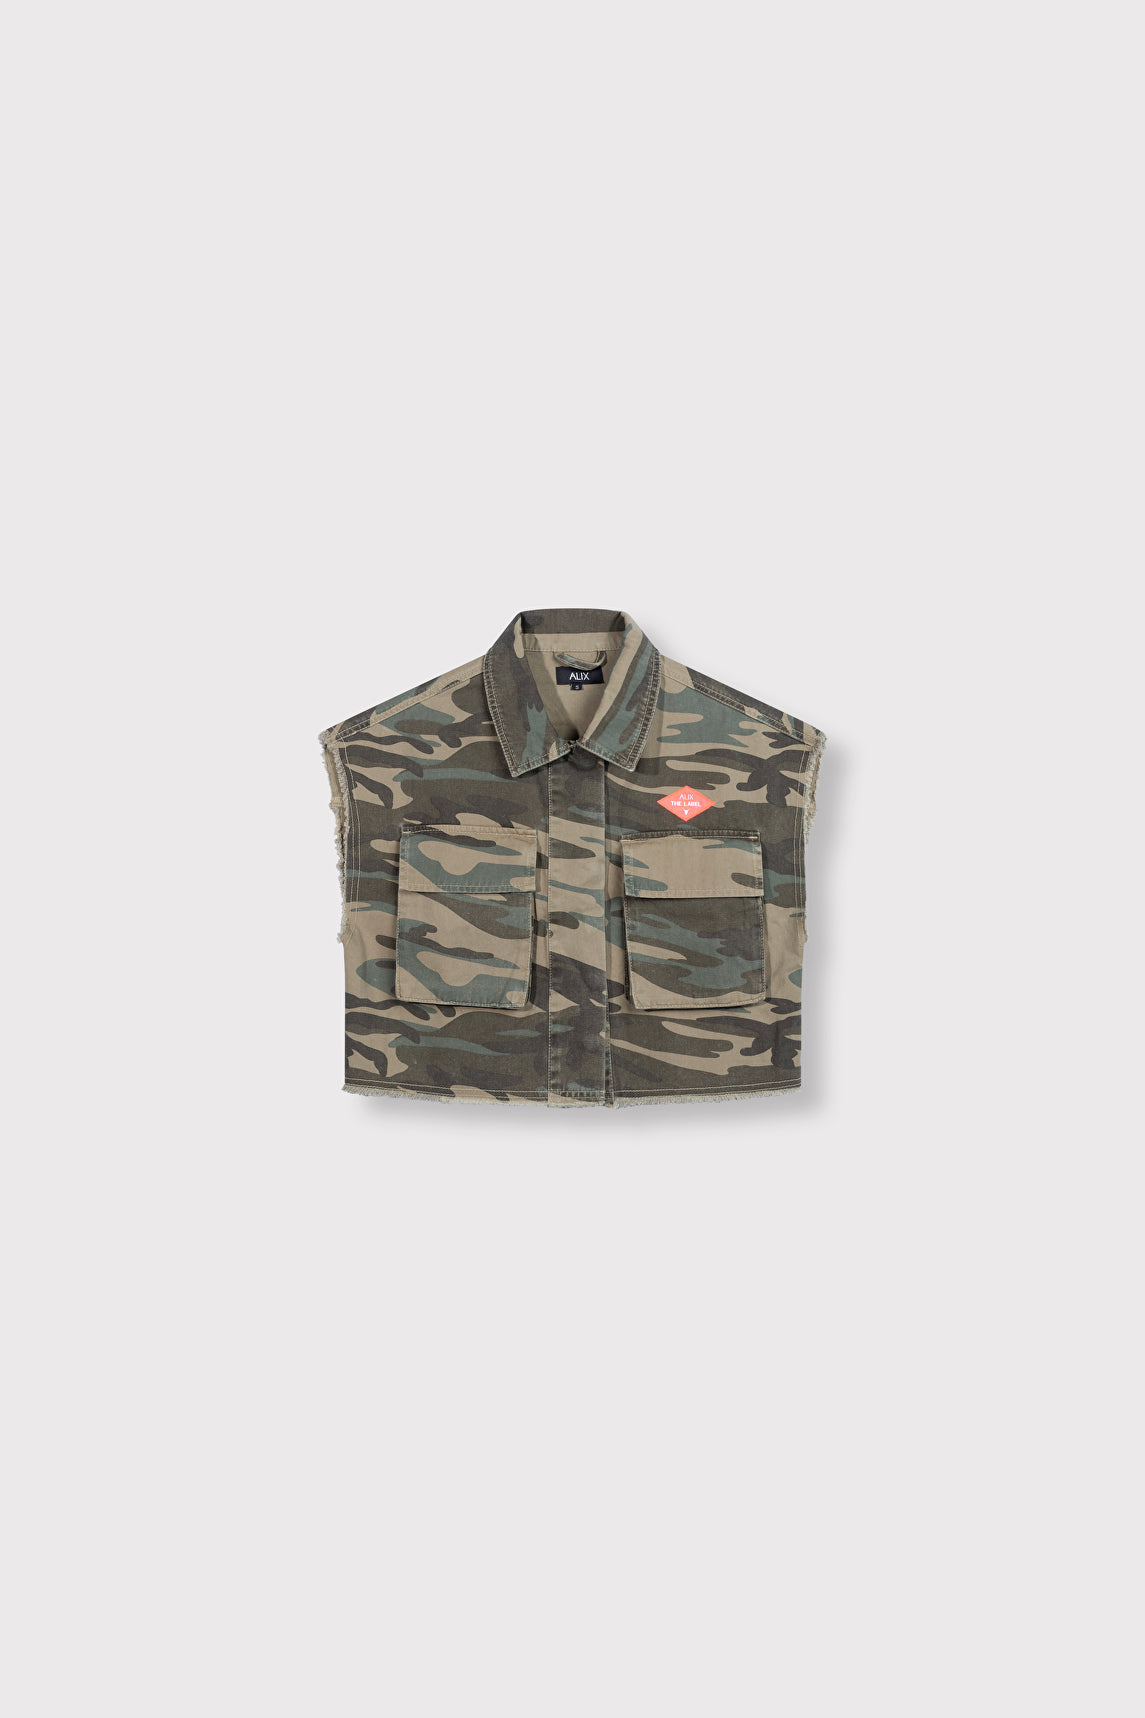 WOVEN CAMOUFLAGE WAISTCOAT - ARMY